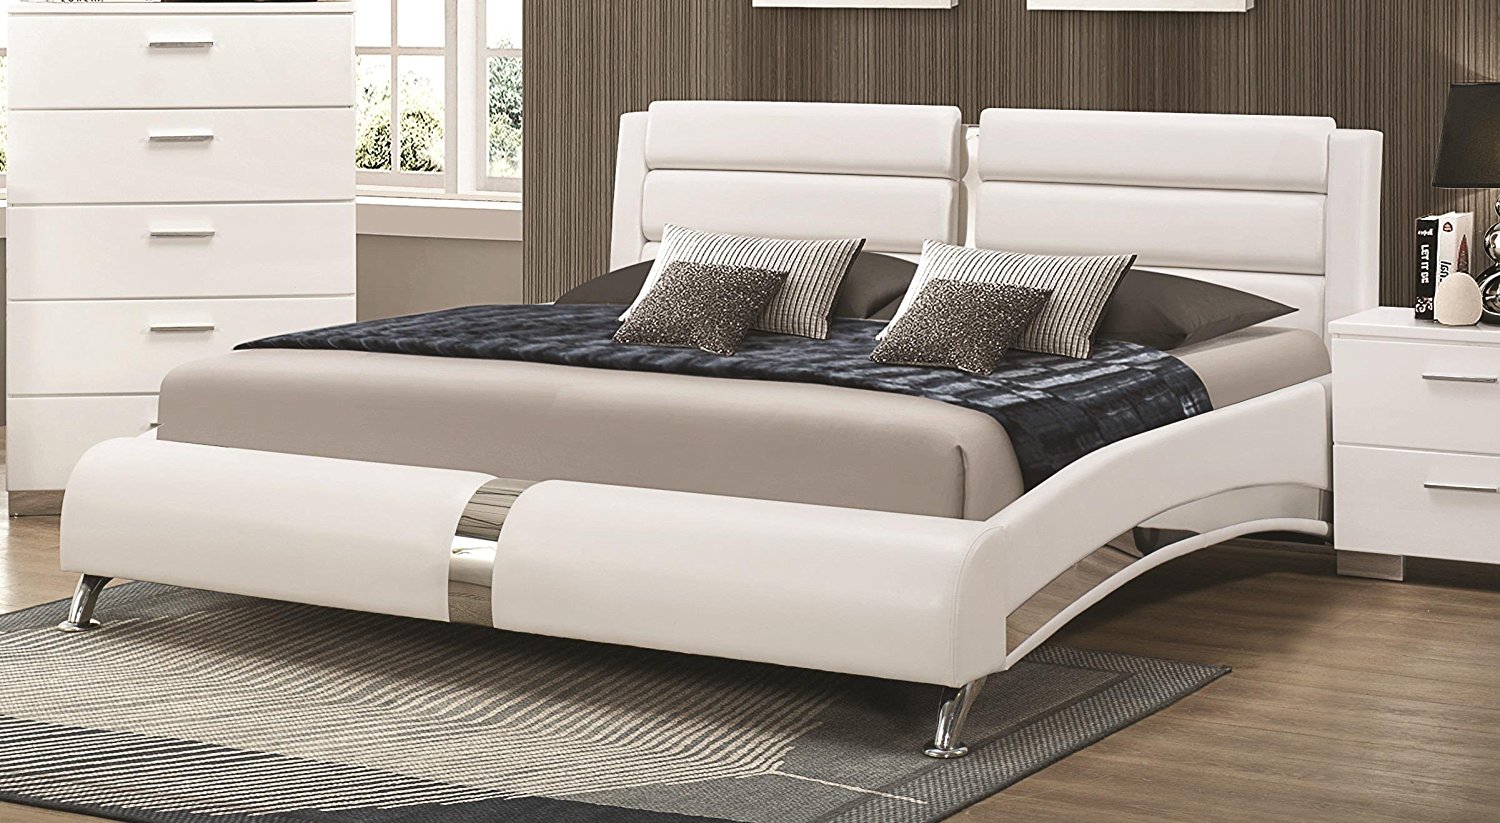 Coaster 300345Q Felicity Queen Bed Glossy White Finish Metallic Accent